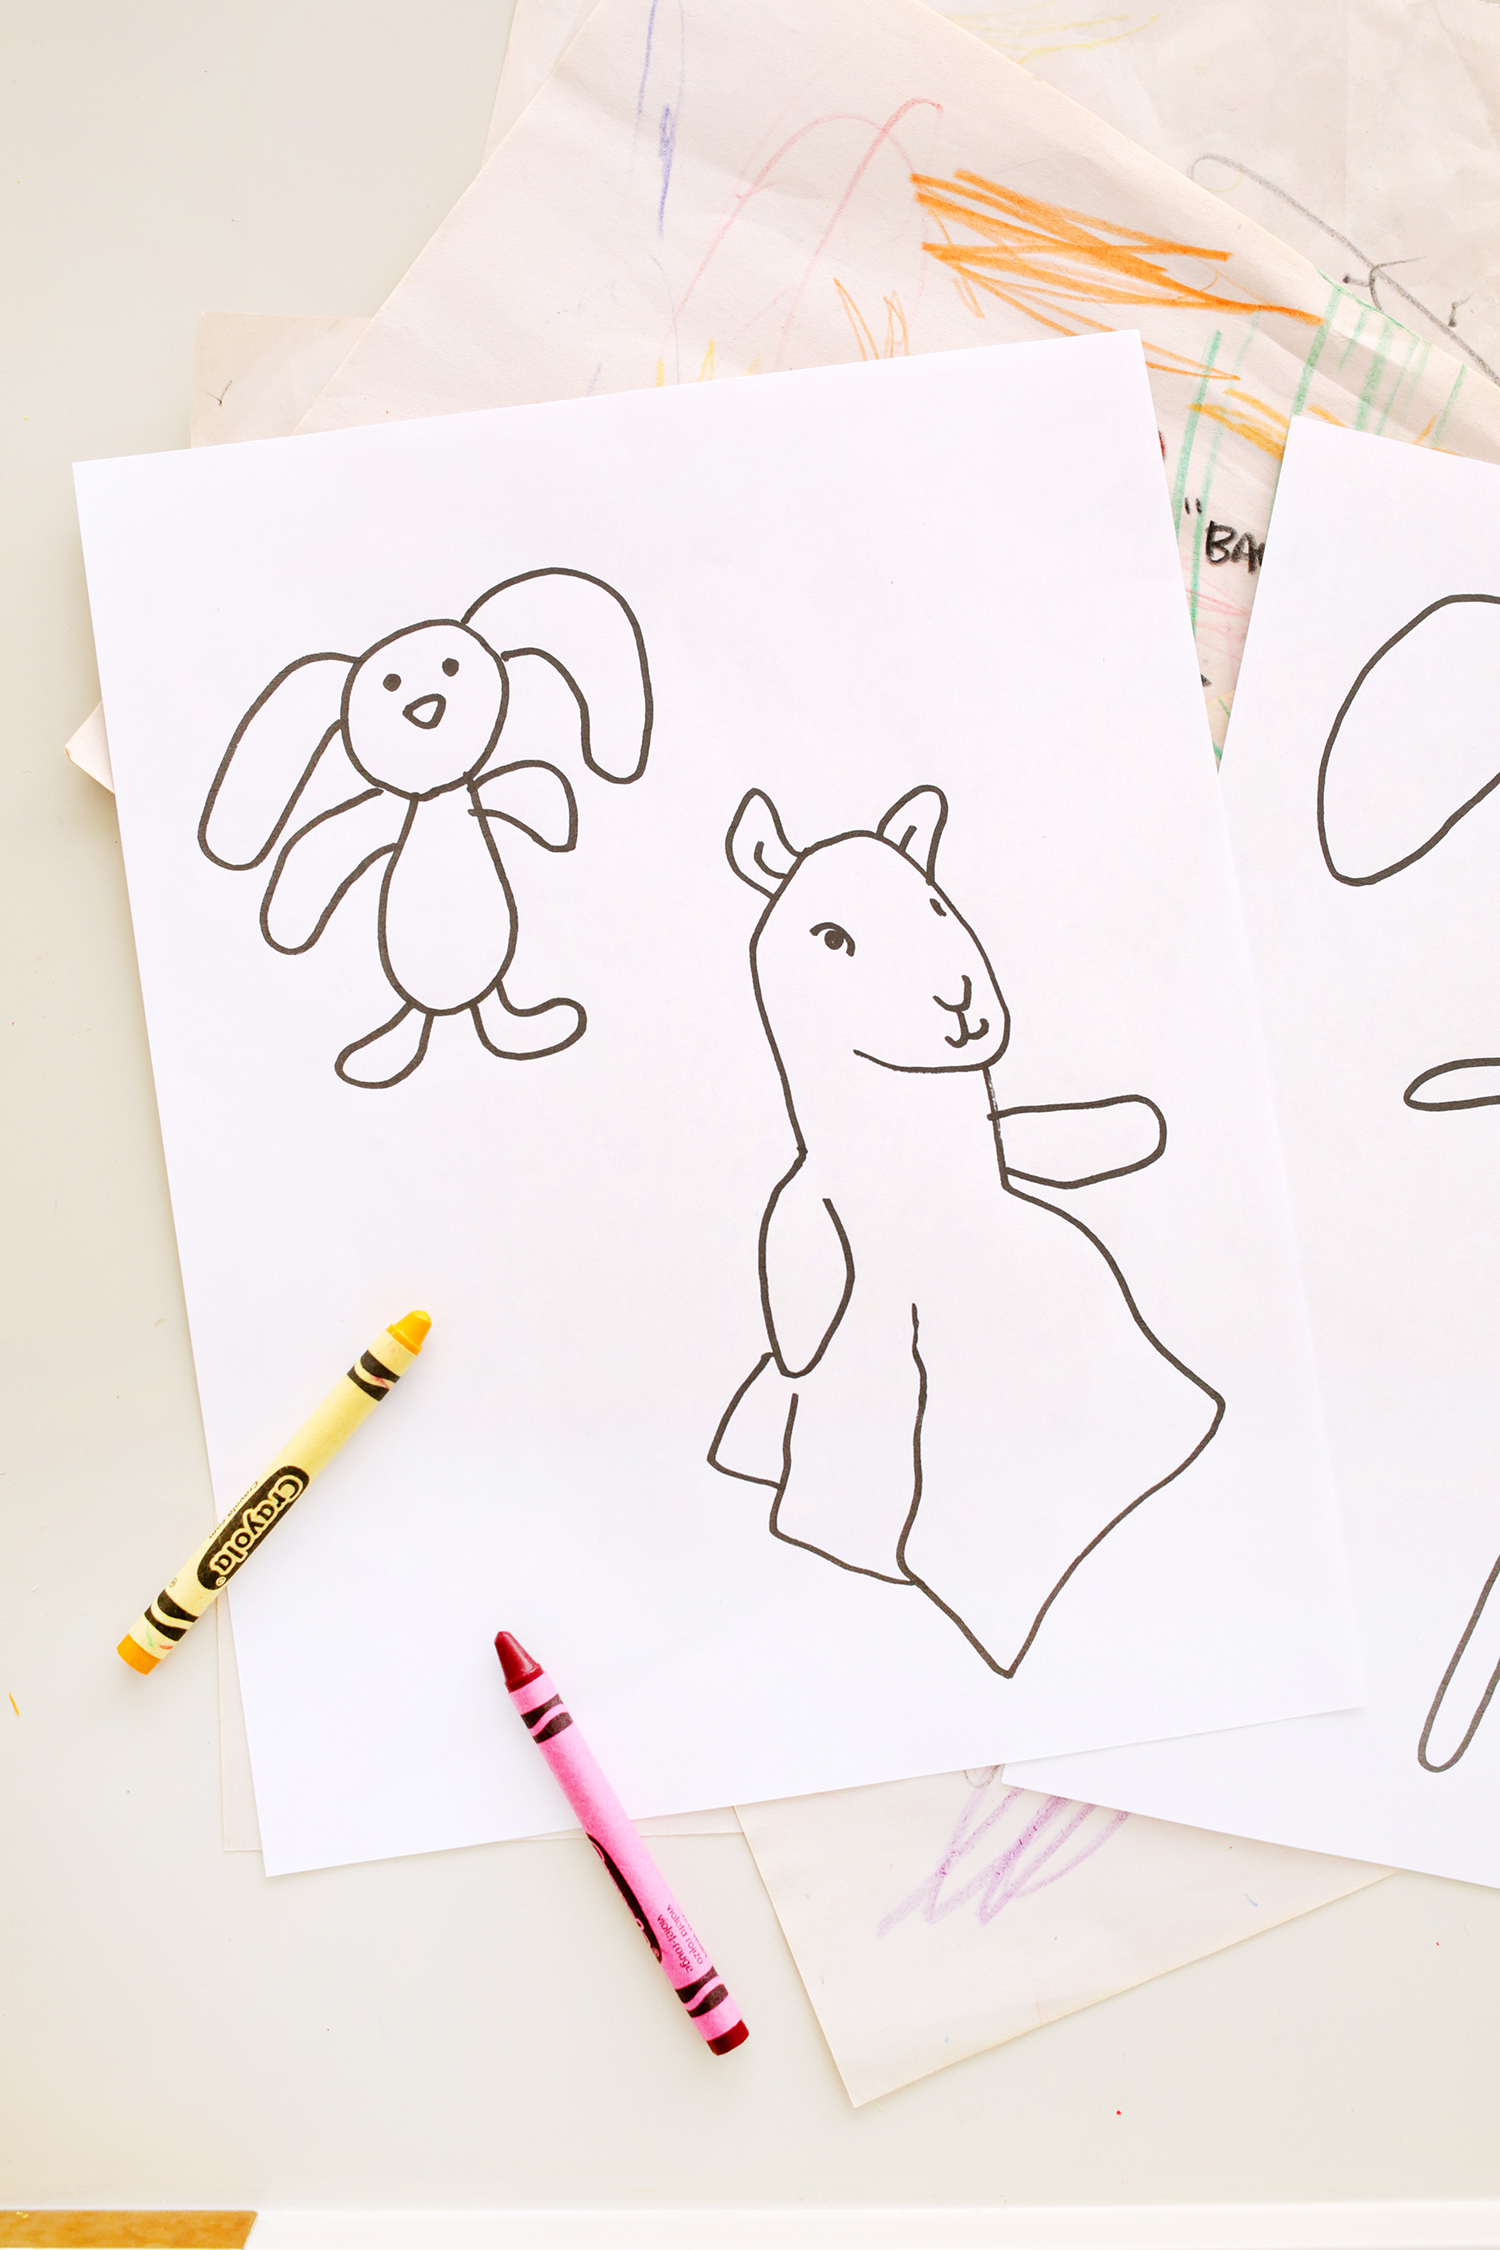 Stuffed Animal/Lovie Coloring Pages For Lola